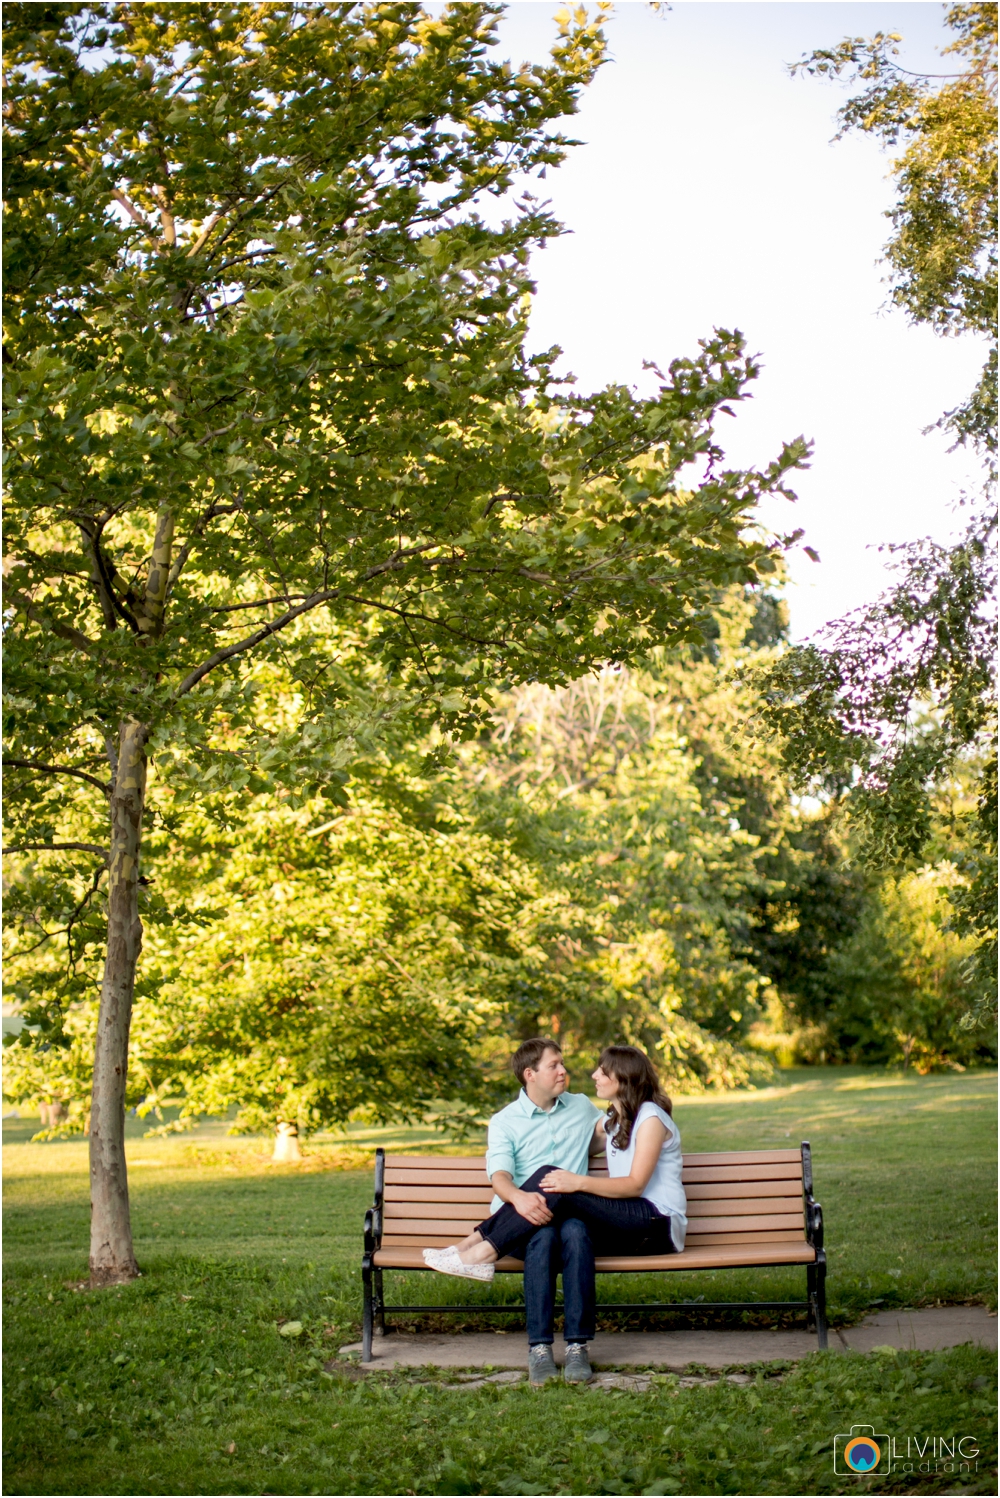 eva-dave-engaged-patterson-park-baltimore-downtown-living-radiant-photography-photos_0029.jpg